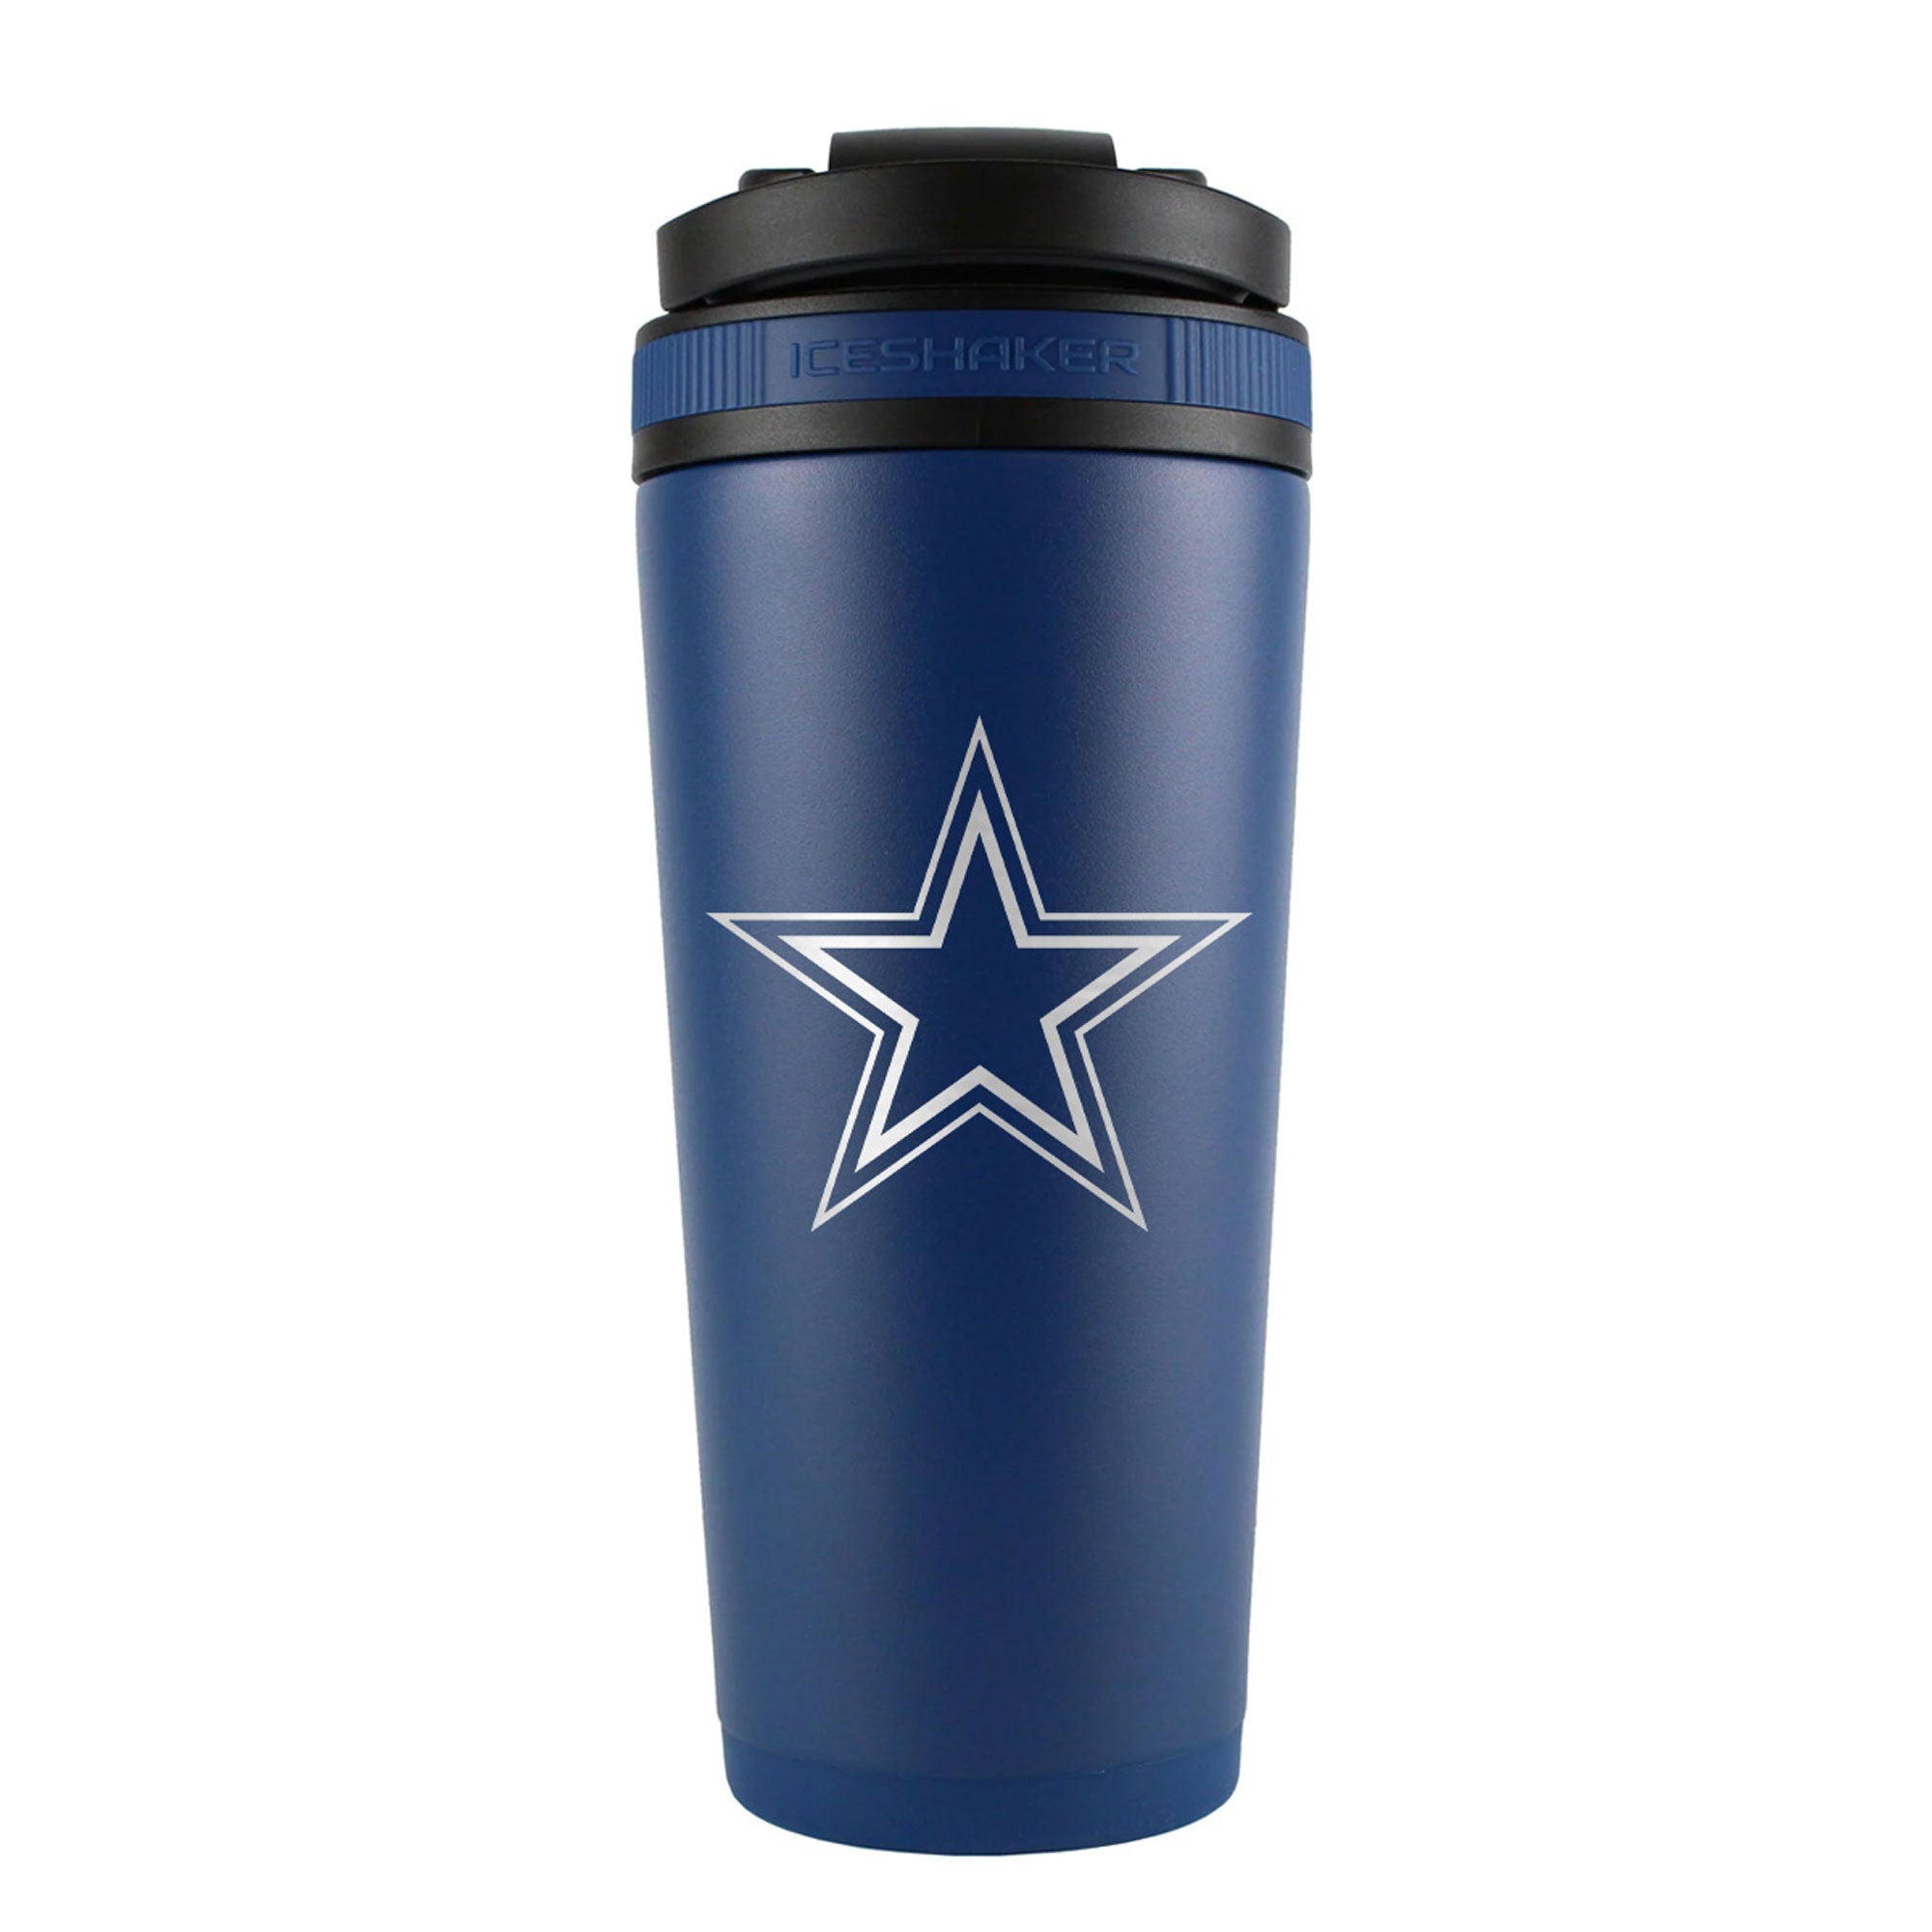 Officially Licensed Dallas Cowboys 26oz Ice Shaker - Navy